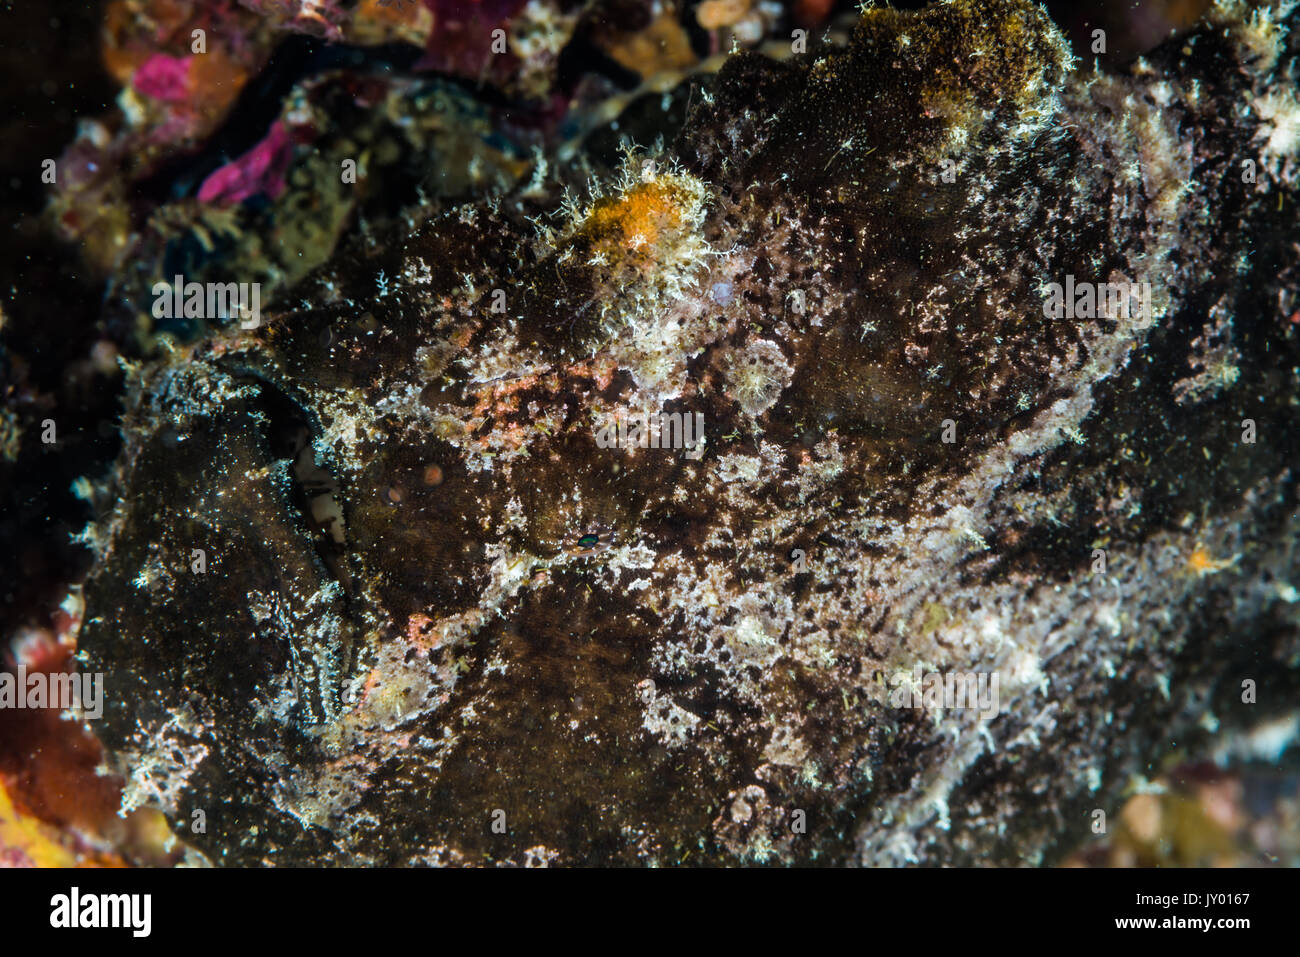 Commerson's frogfish, Antennarius commerson  (Lacepède, 1798), camouflaged in a stone. Depth 15m Stock Photo